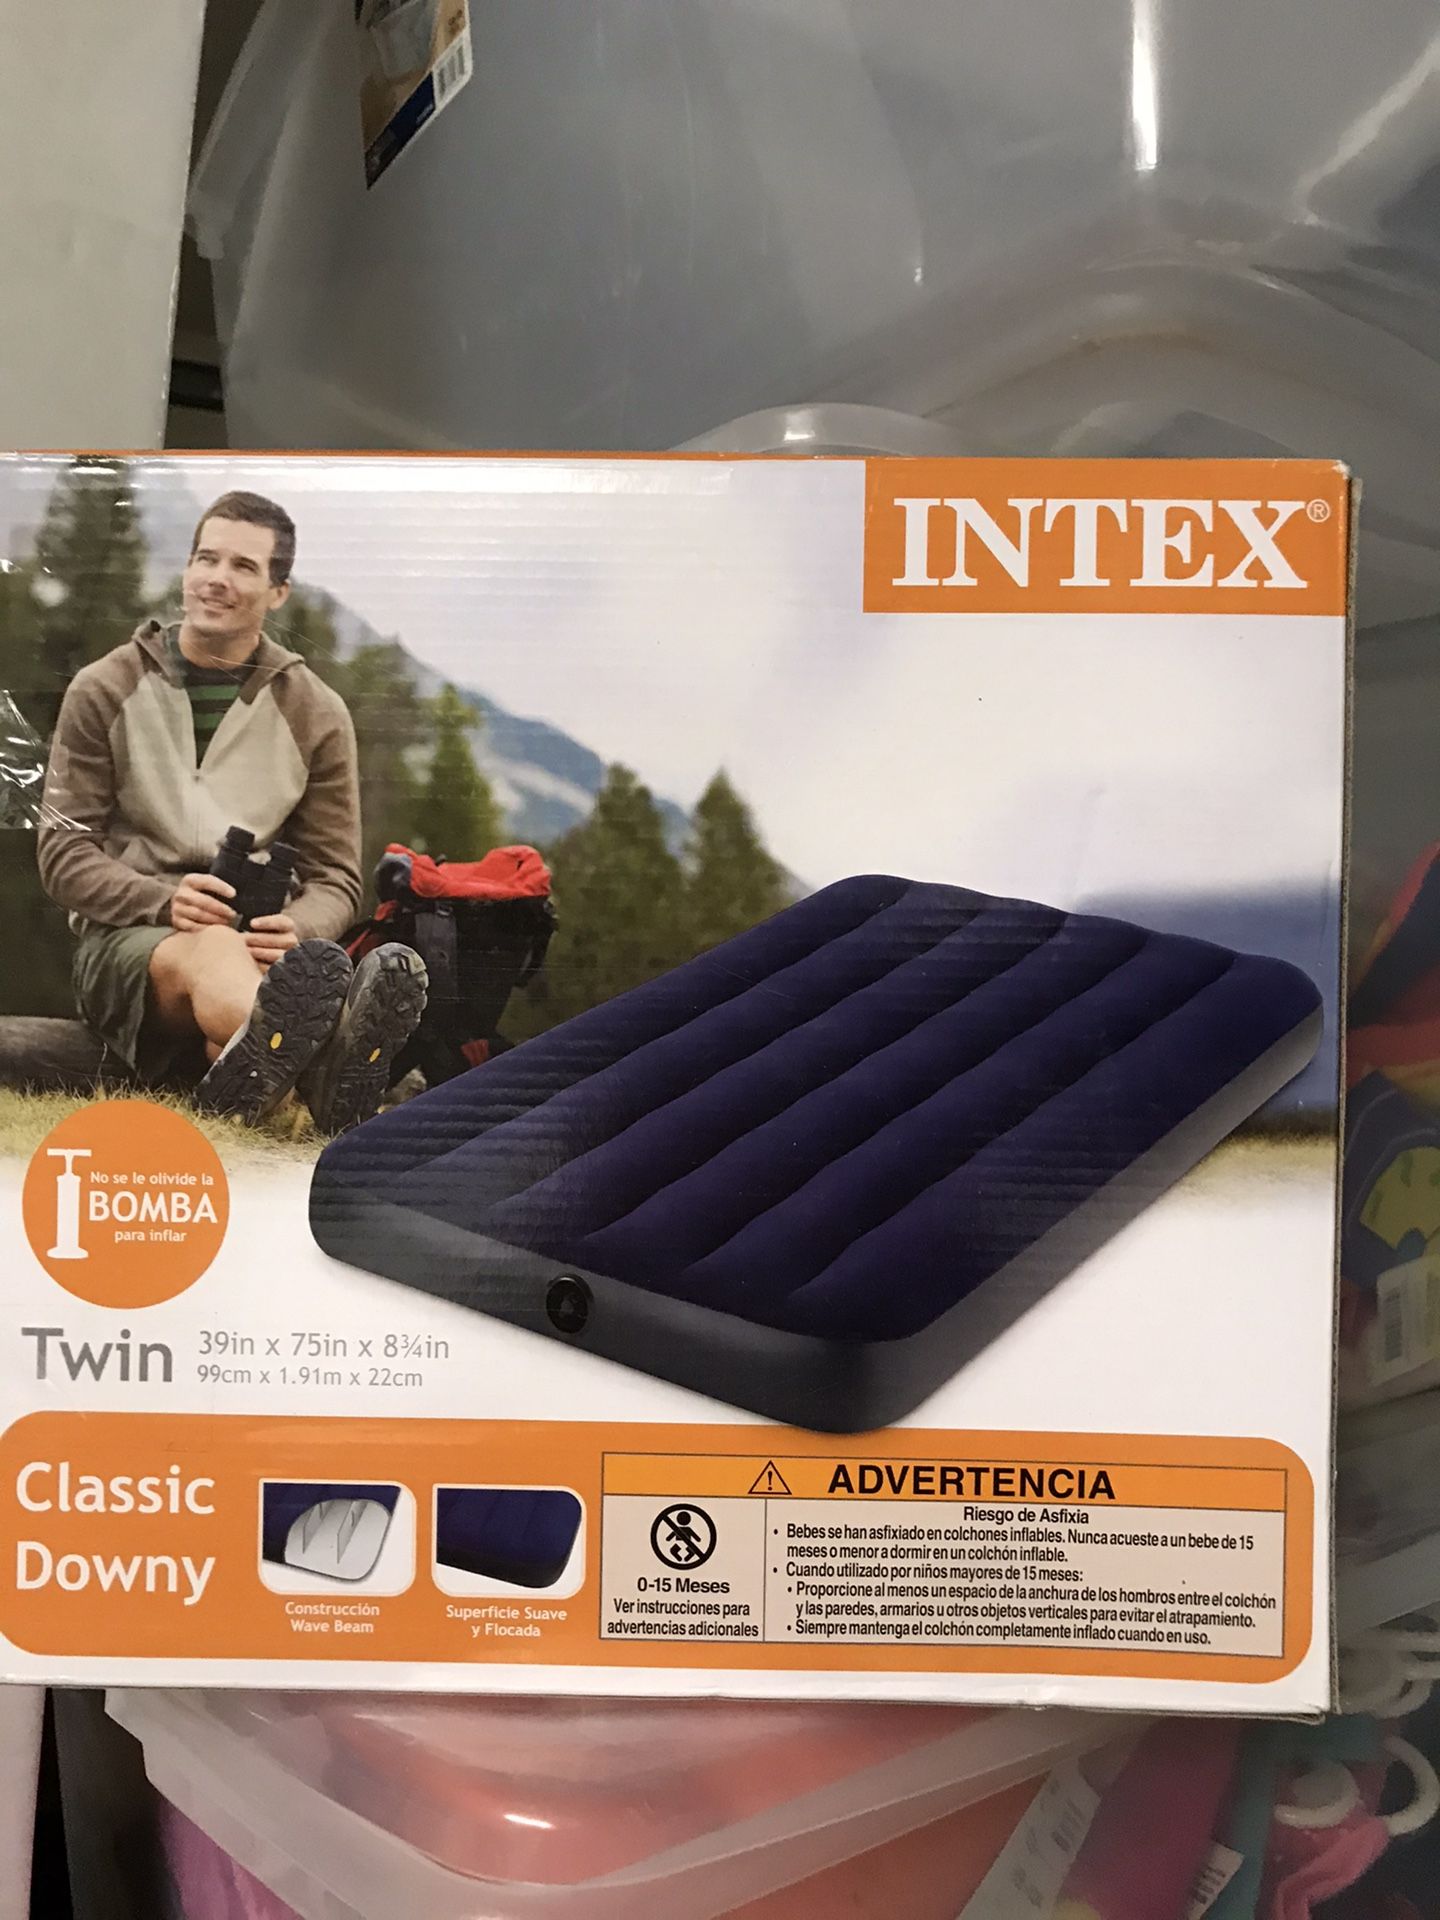 New Twin inflatable mattress